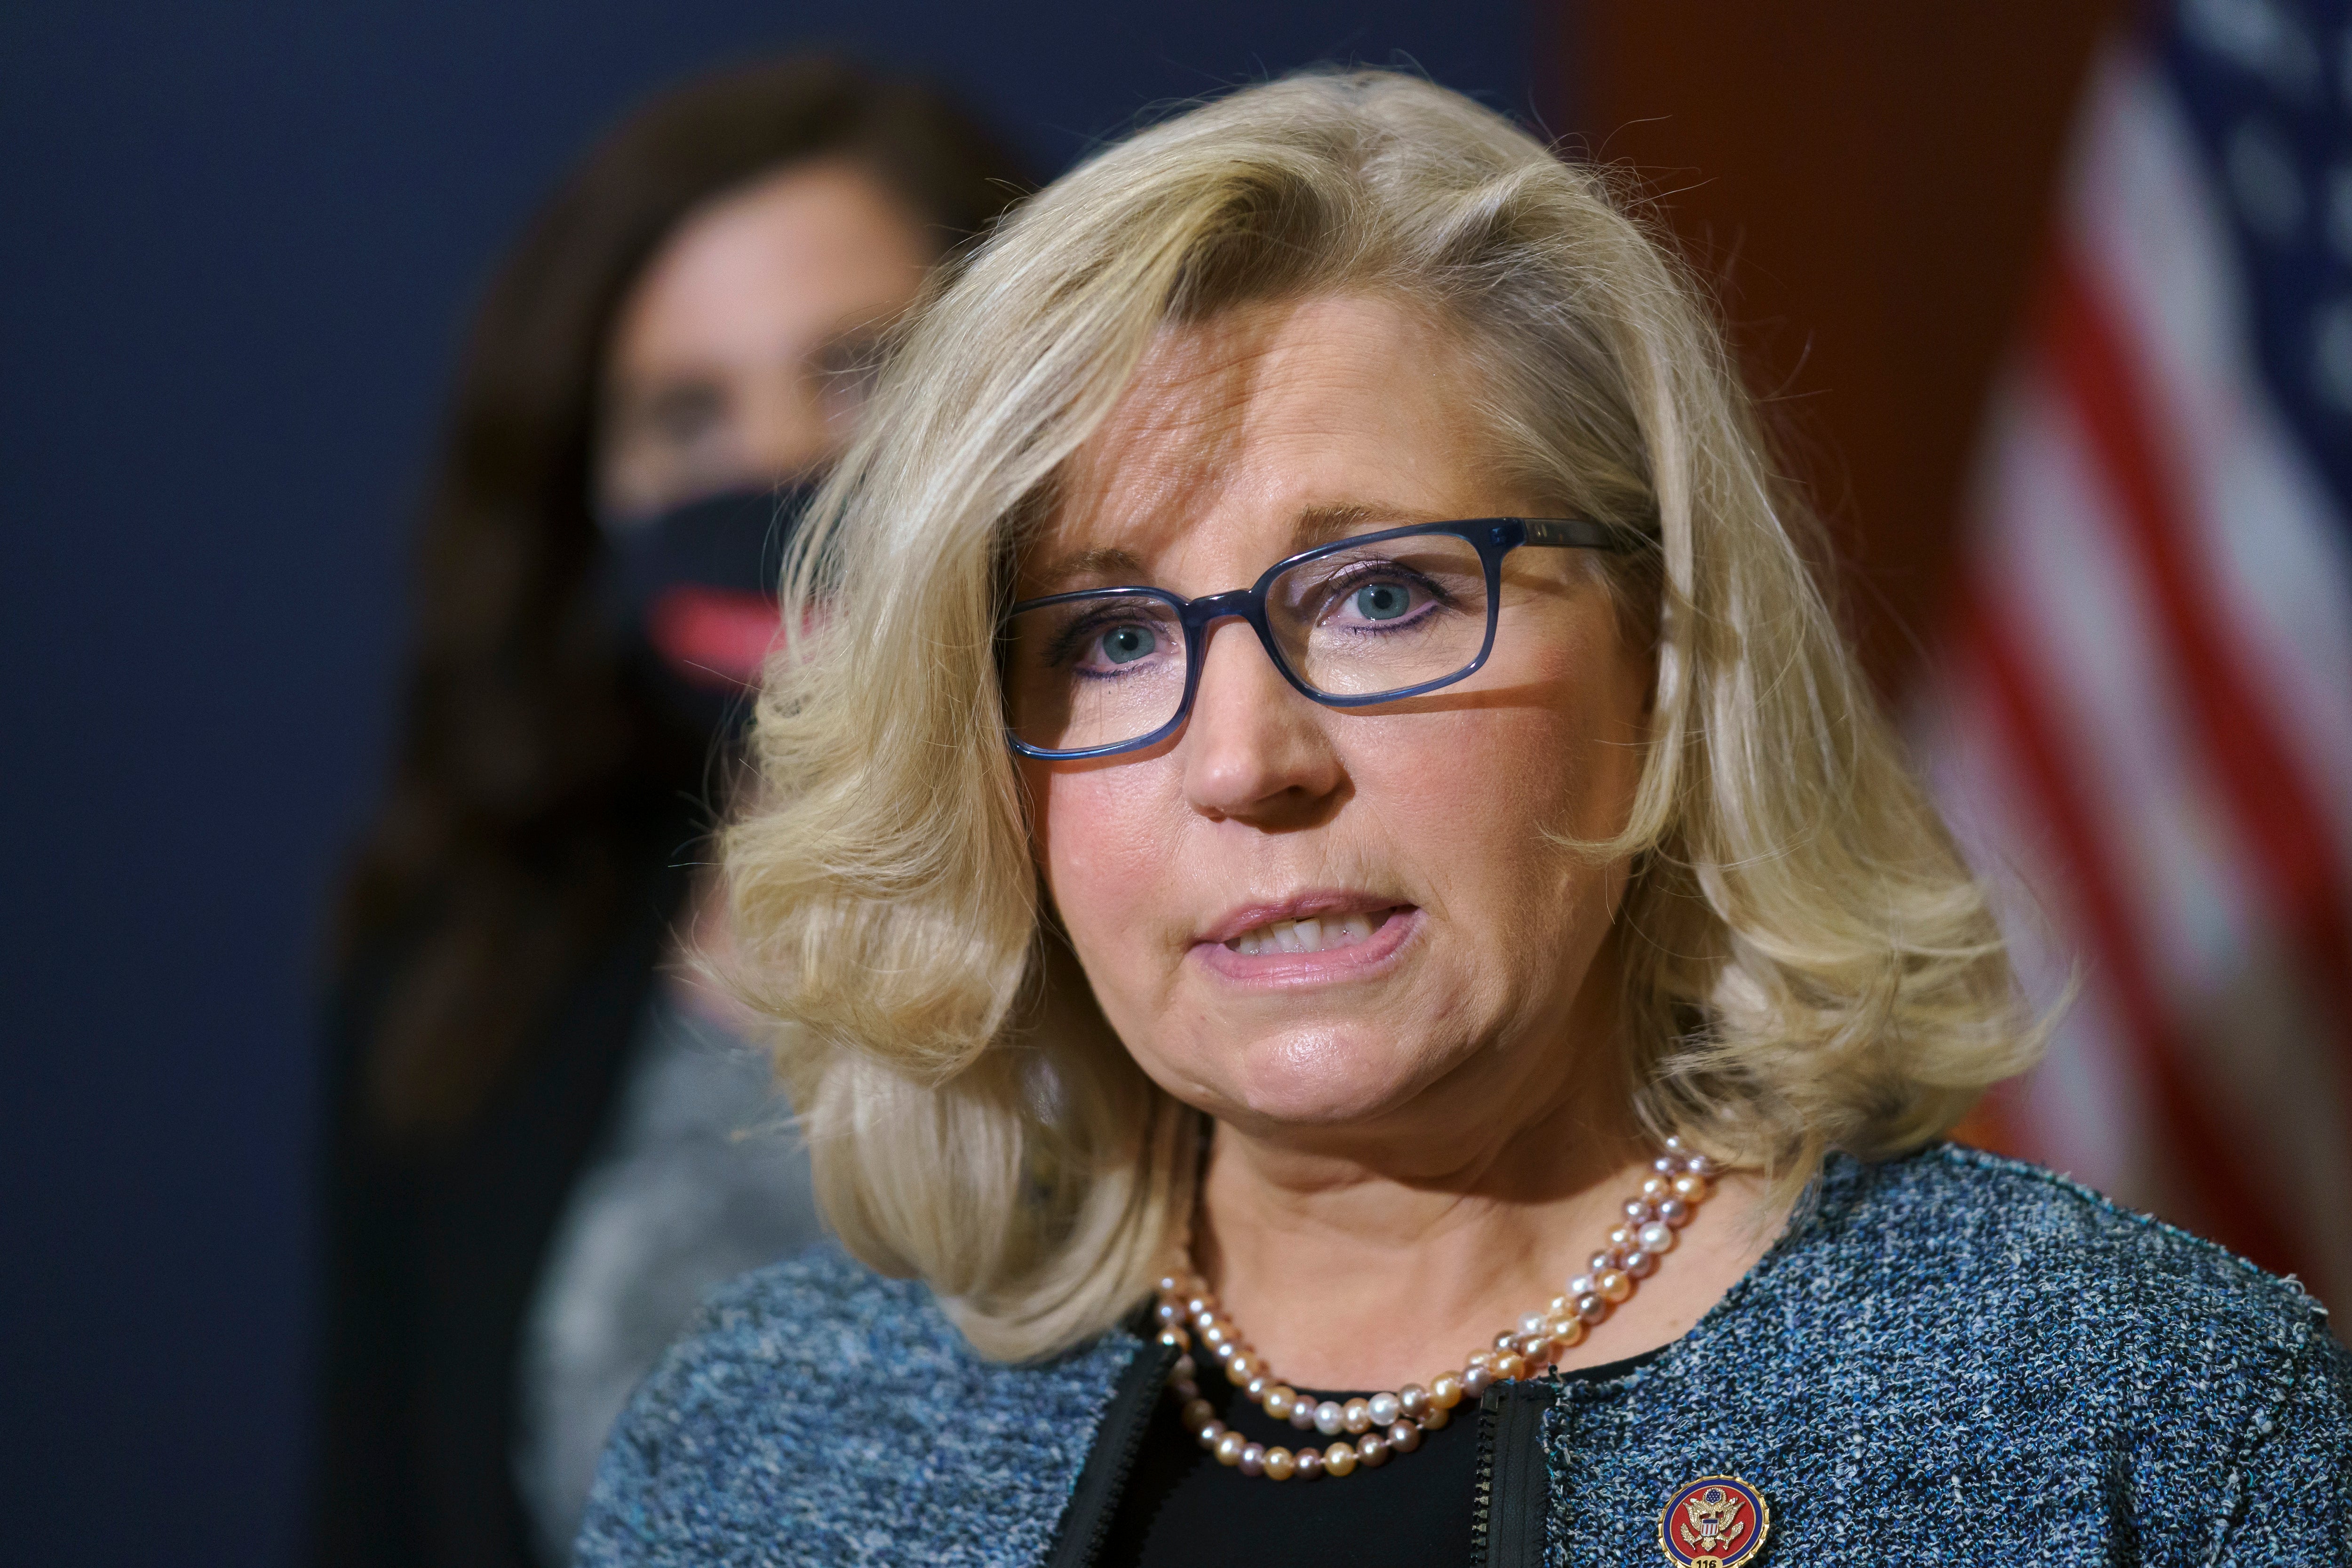 House Republicans are moving to oust Rep Liz Cheney from her leadership role